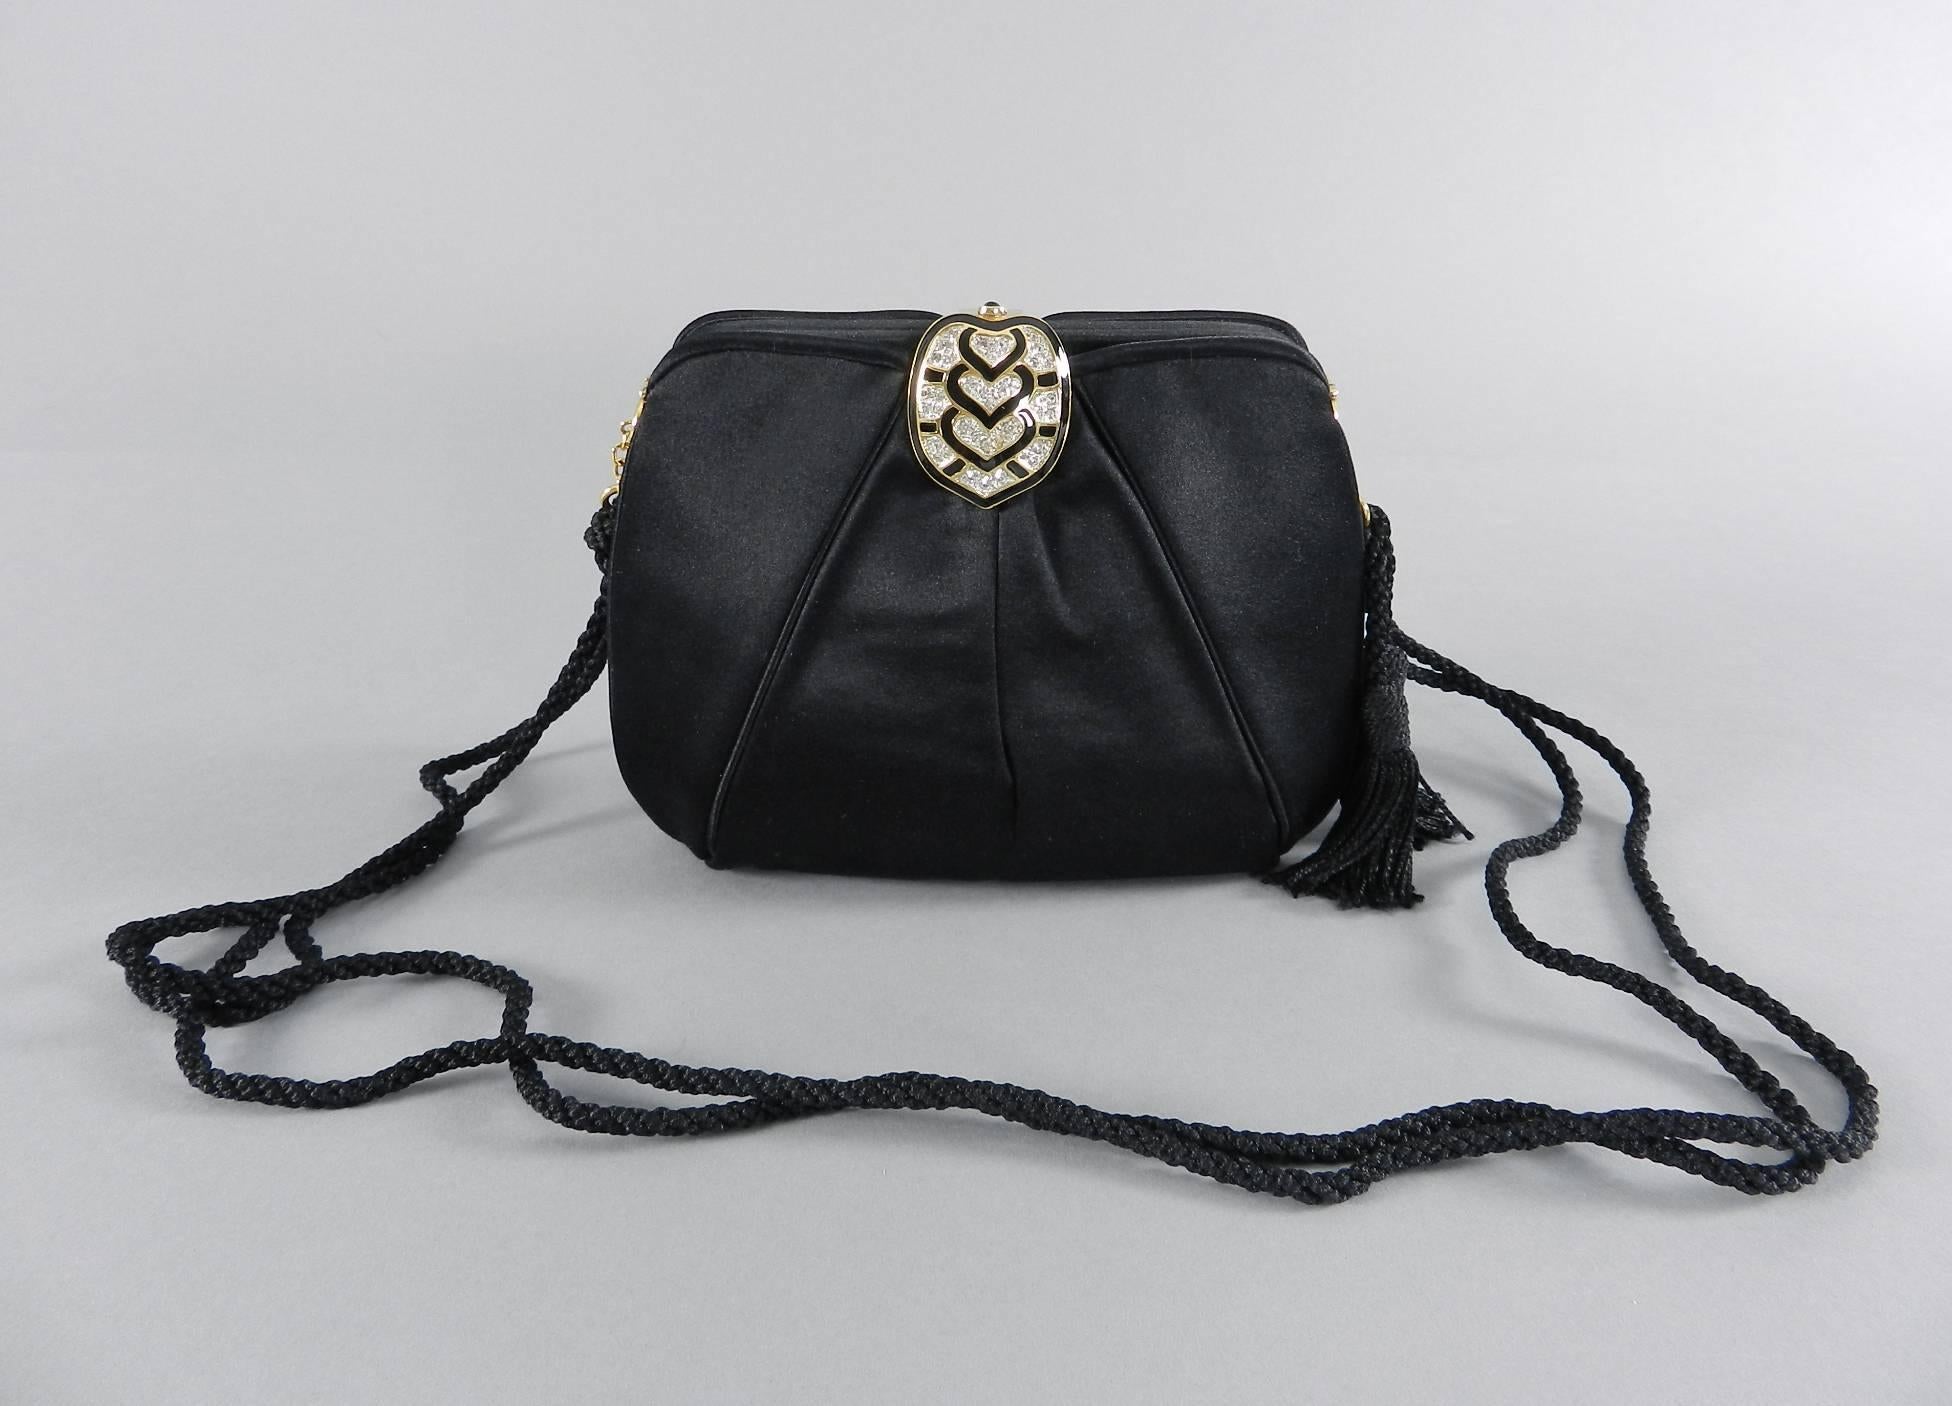 Judith Leiber Black Silk Satin Evening Bag with Rhinestone Clasp.  Includes small goldtone metal comb and duster. Long rope strap with two tassels.  Art deco style black enamel, rhinestone, and goldtone metal clasp. Excellent clean condition.  Body